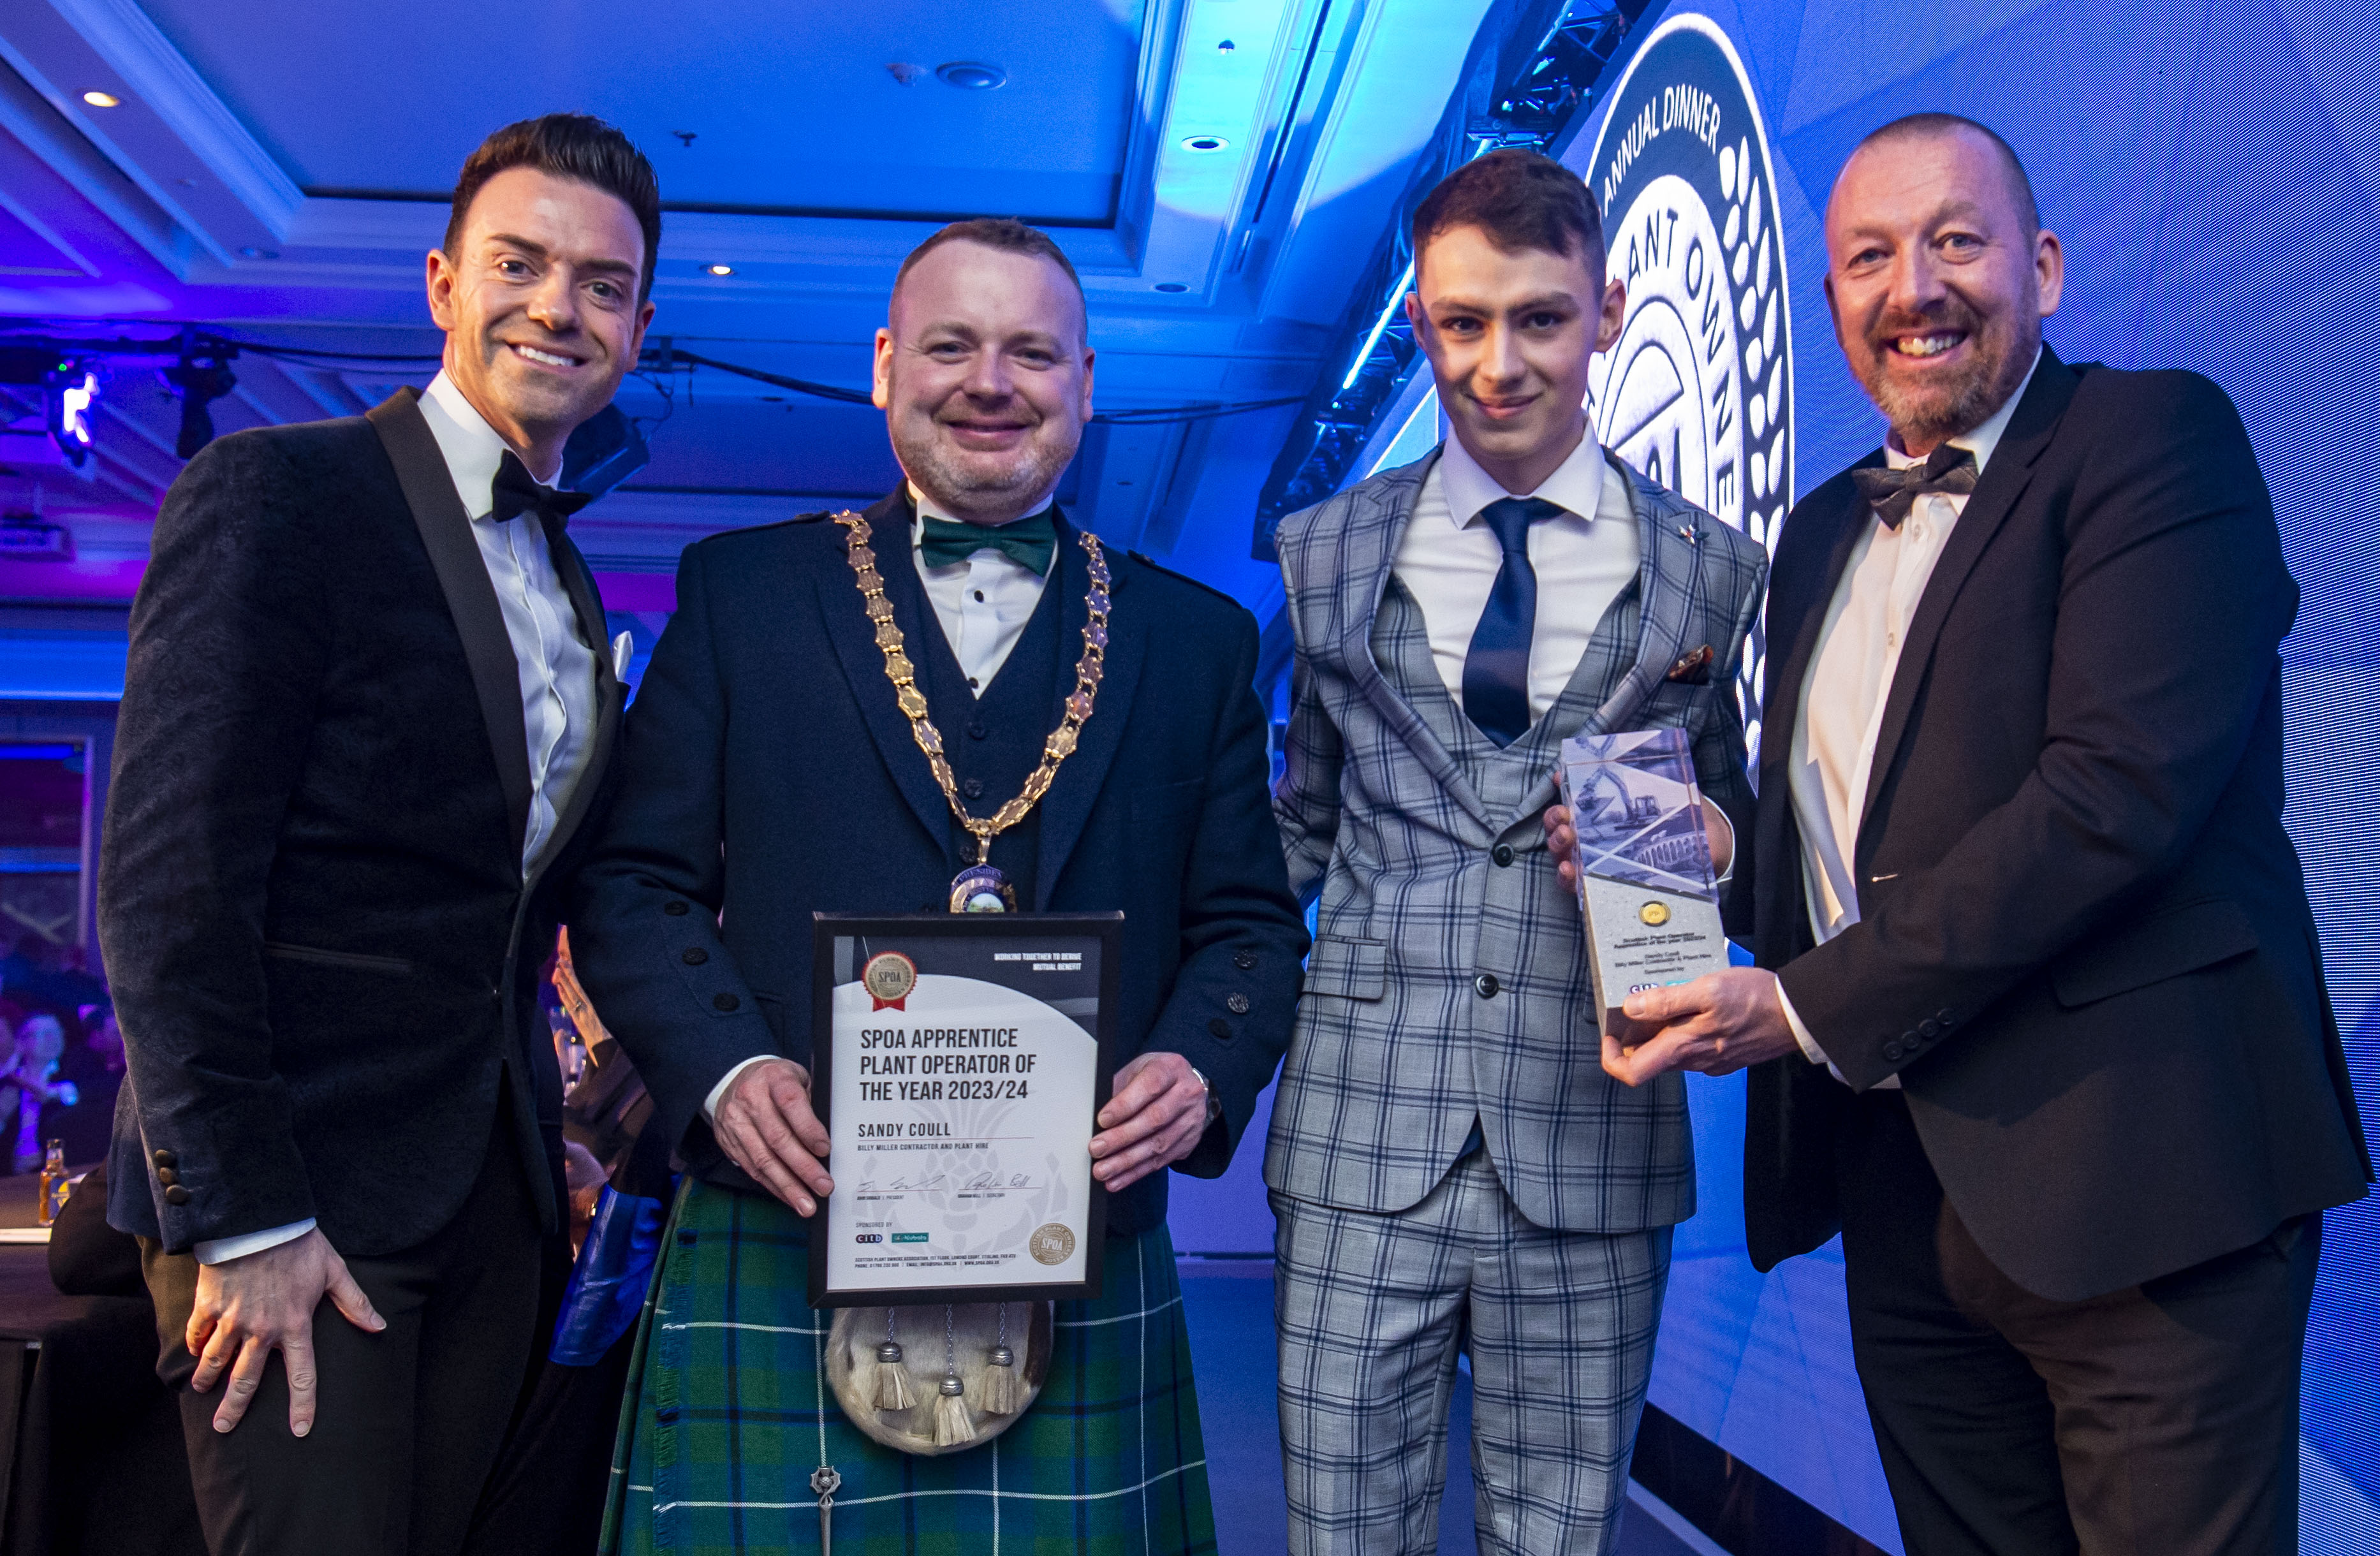 Scottish Plant Owners Association announces Apprentices of the Year